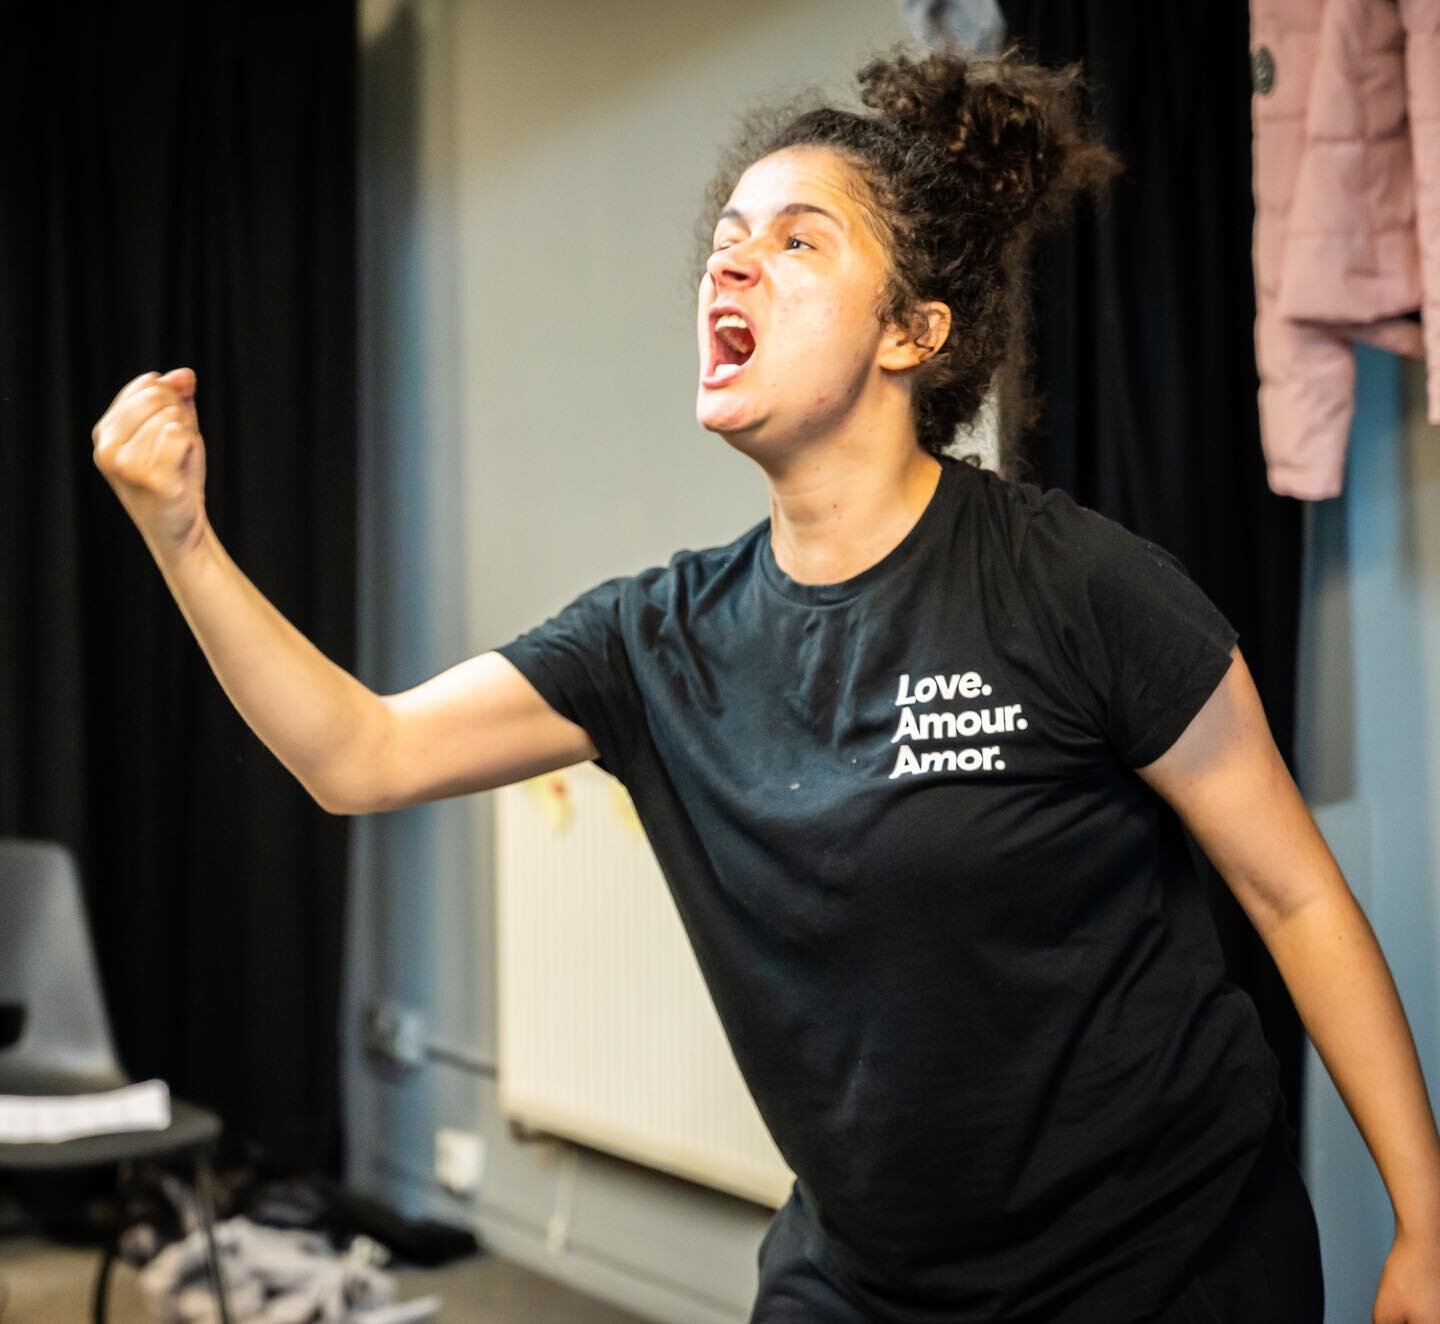 This face of determination can only mean one thing&hellip; Our #EdFringe journey officially begins today with our first preview! Words can&rsquo;t describe how excited we are to share this story with you.

&ldquo;Working-class means many things now. 